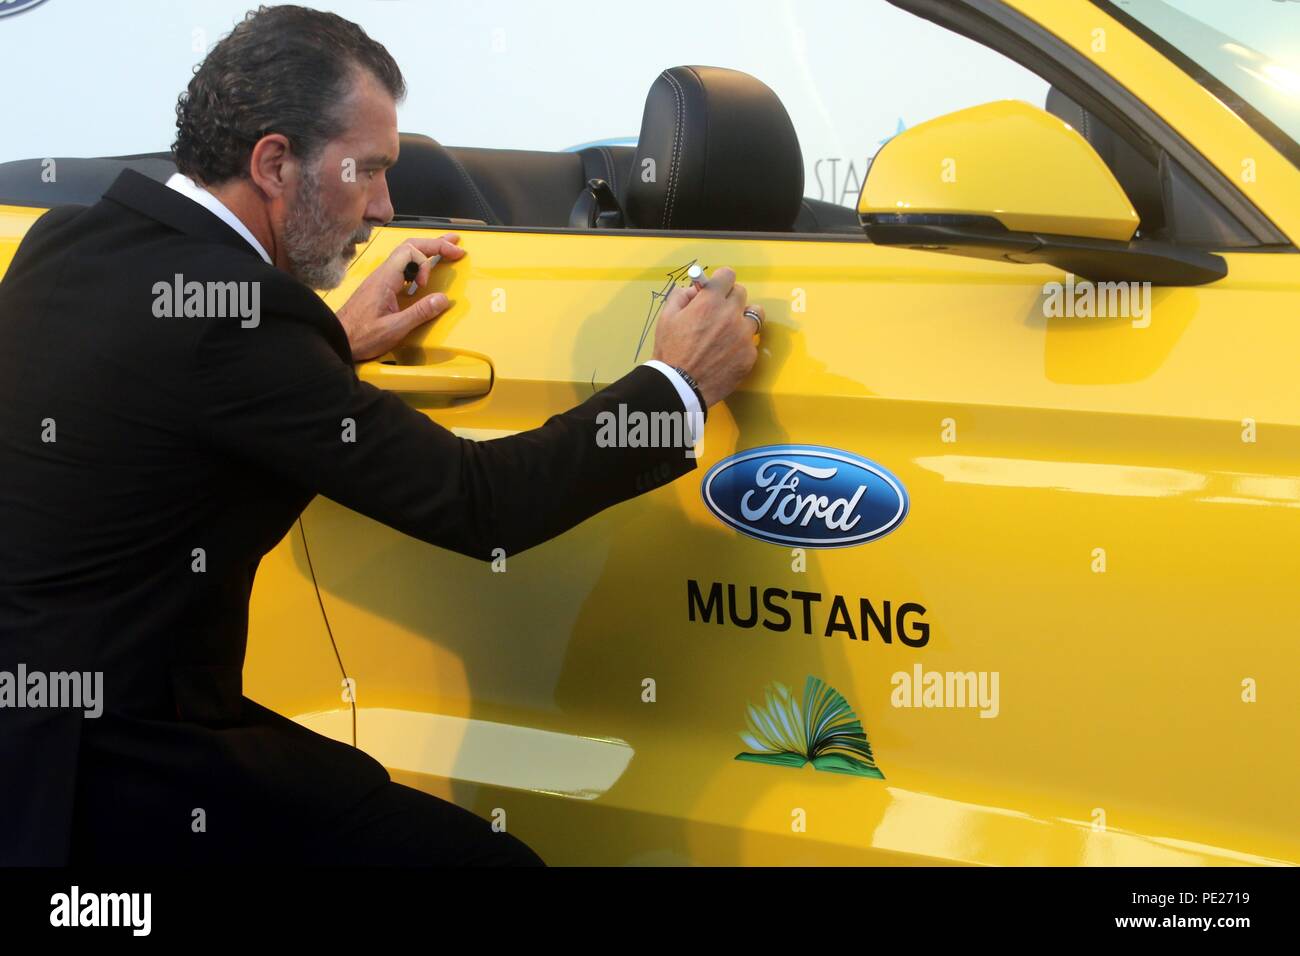 Marbella, Spain 11th August 2018. Donation of a Ford Mustang at the Starlite charity gala, signed by Colombian singer Juanes and Spanish actor Antonio Banderas in Marbella, Spain on August 11, 2018  Carnero / 692 / Cordon Press Credit: CORDON PRESS/Alamy Live News Stock Photo